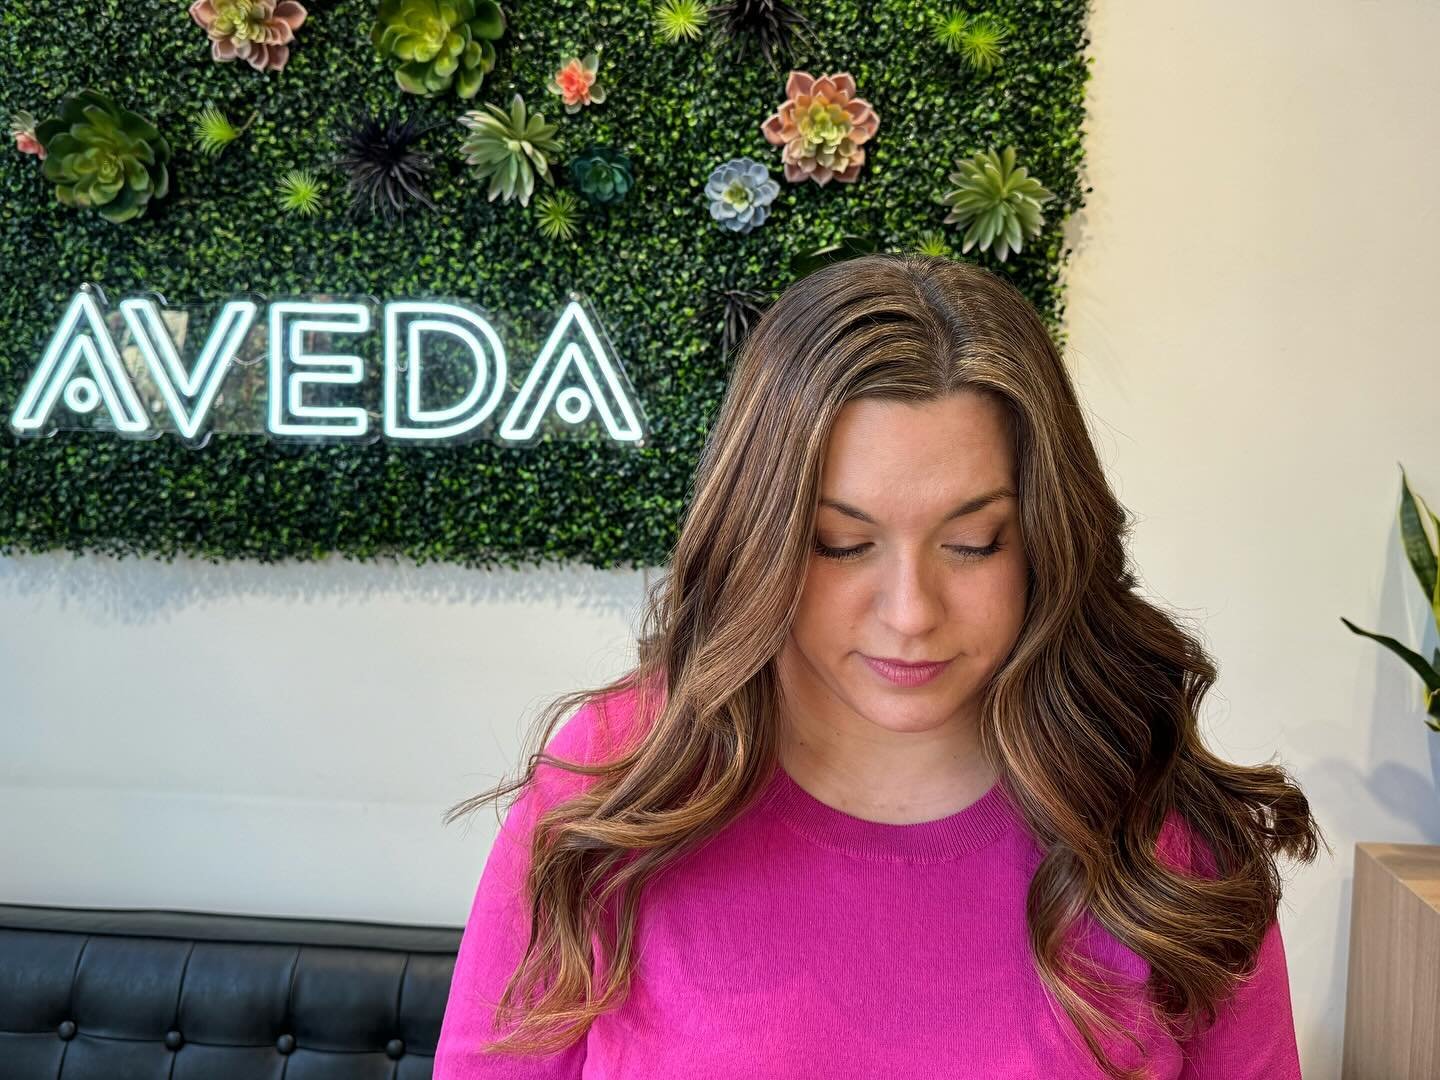 Look at this stunning Carmel balayage by @jknudsenhair and haircut by @_alexknudsen, crafted with precision using Aveda hair color. Elevate your look and embrace the natural beauty of your locks with this timeless technique. 

#AvedaColor #BalayageMa